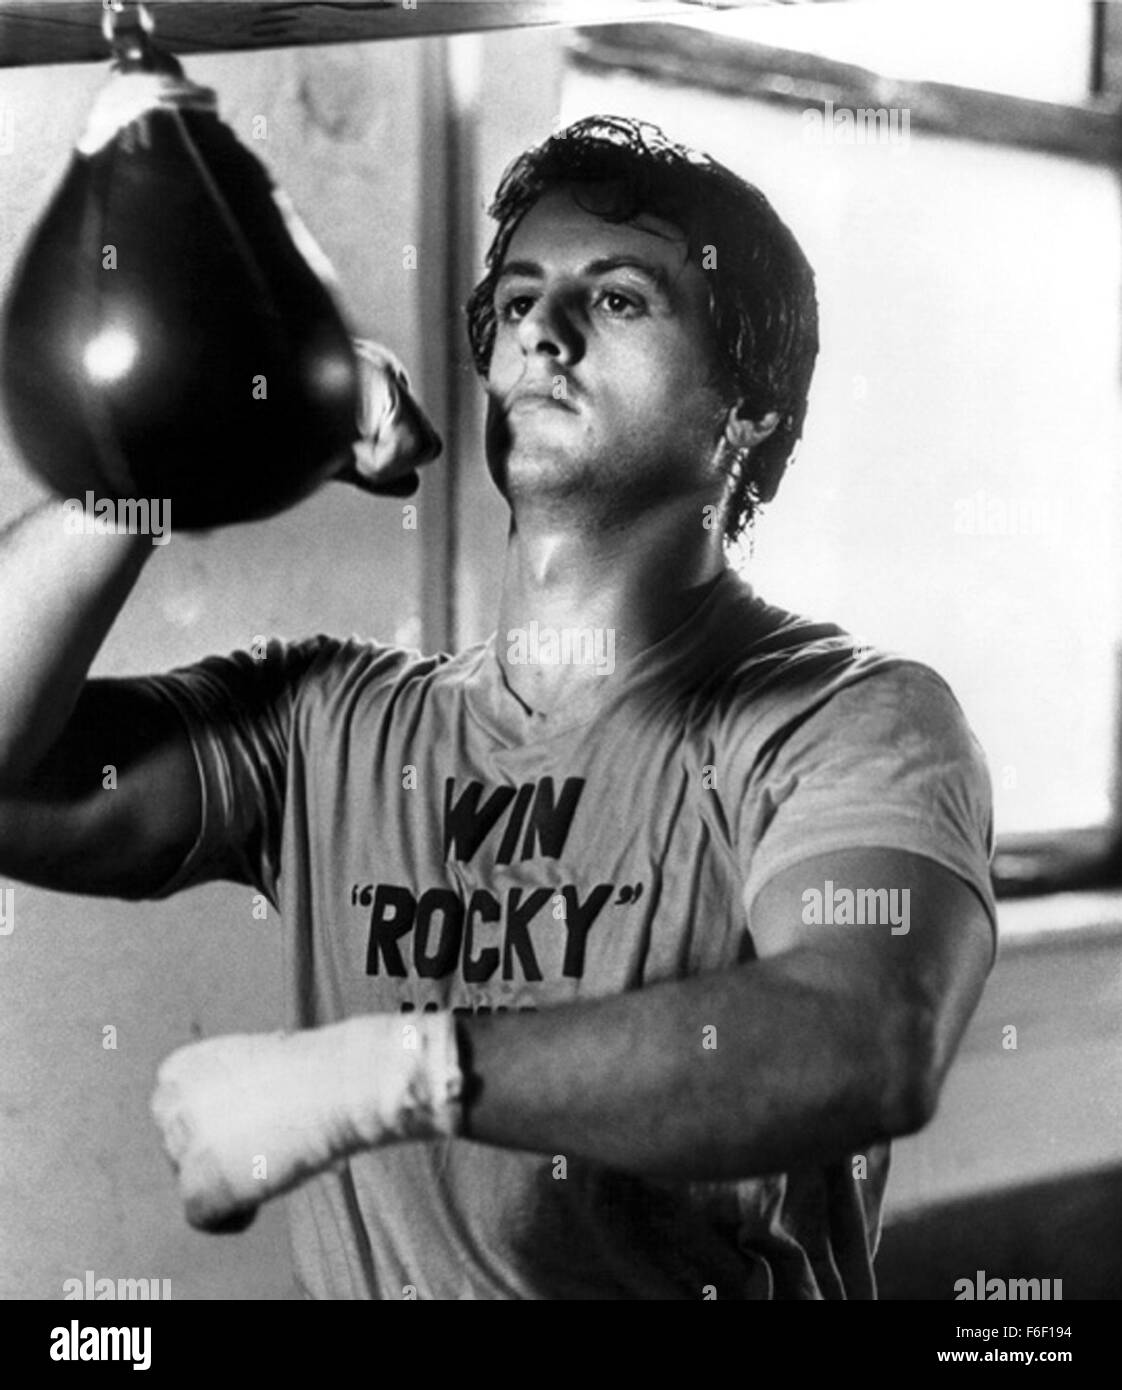 Film Title:  ROCKY.  DIRECTOR John G. Avildsen.  STUDIO:  United Artists.  PLOT:  The action-packed, crowd-pleasing story, shot mostly on location, tells of the rise of a small-time, underdog Philadelphia boxer, Rocky Balboa (Sylvester Stallone) against insurmountable odds in a big-time bout with Apollo Creed (Carl Weathers), with the emotional support of a shy,  loving girlfriend named Adrian (Talia Shire), and wily fight manager Mickey (Burgess Meredith). PICTURED:  SYLVESTER STALLONE. Stock Photo